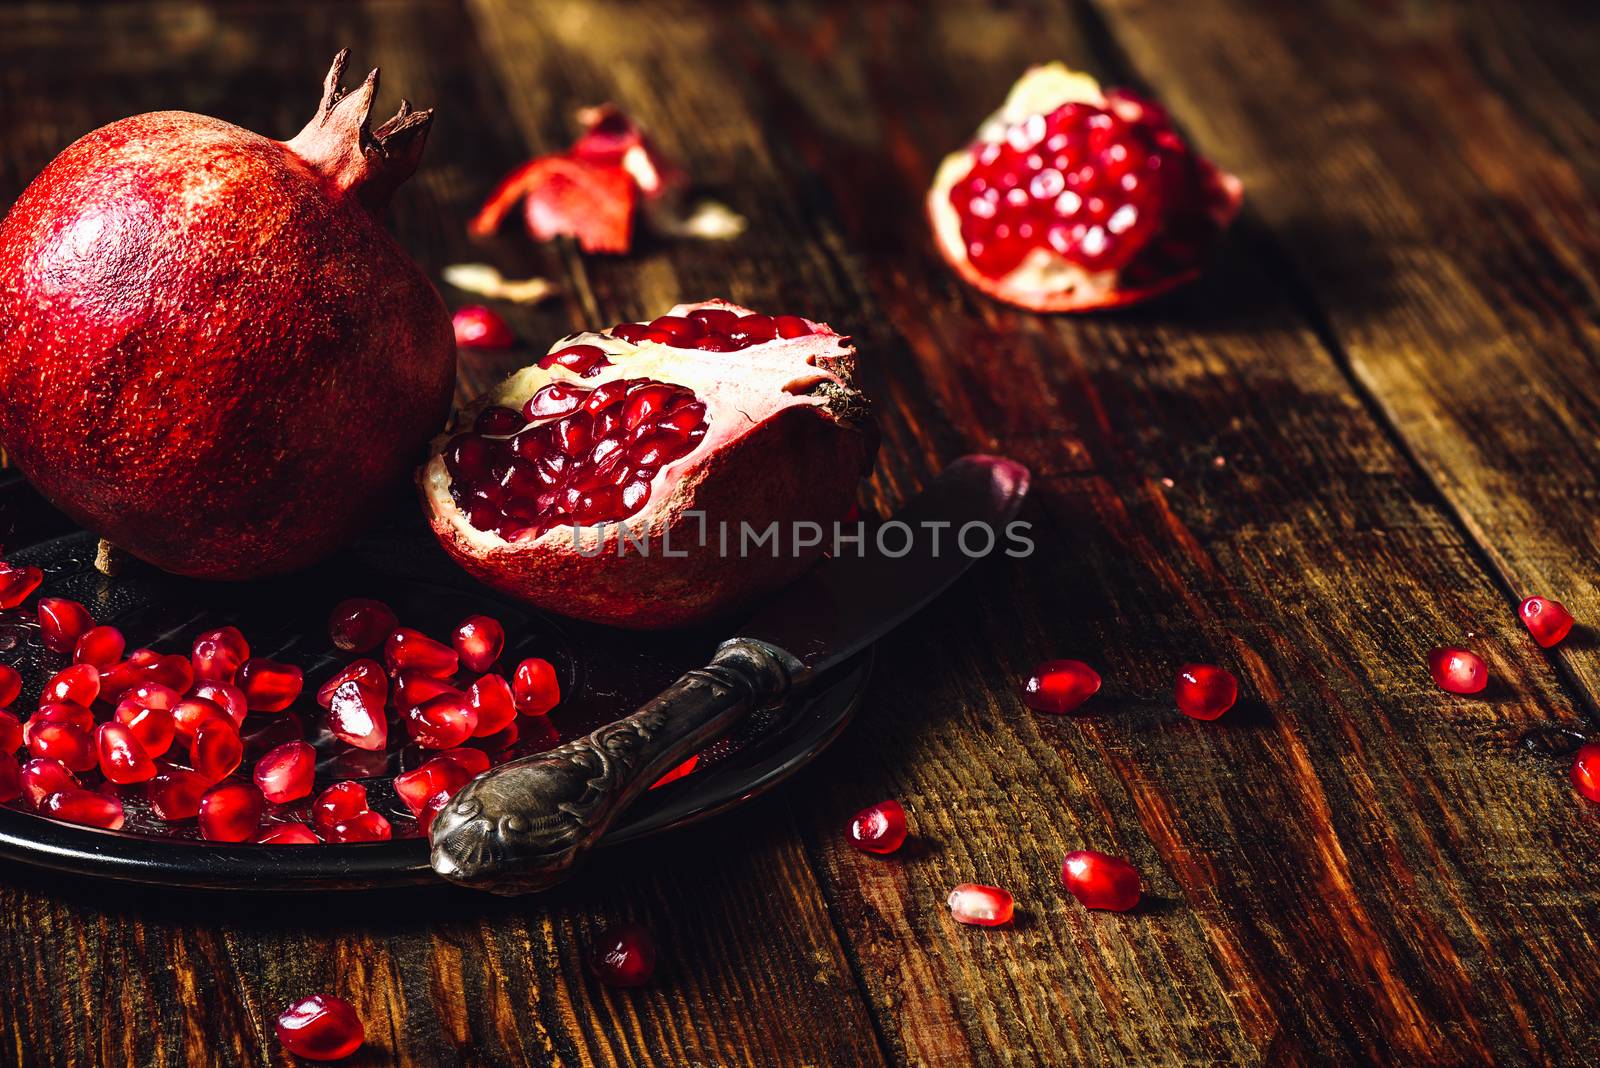 Whole and Opened Pomegranates on Plate. by Seva_blsv